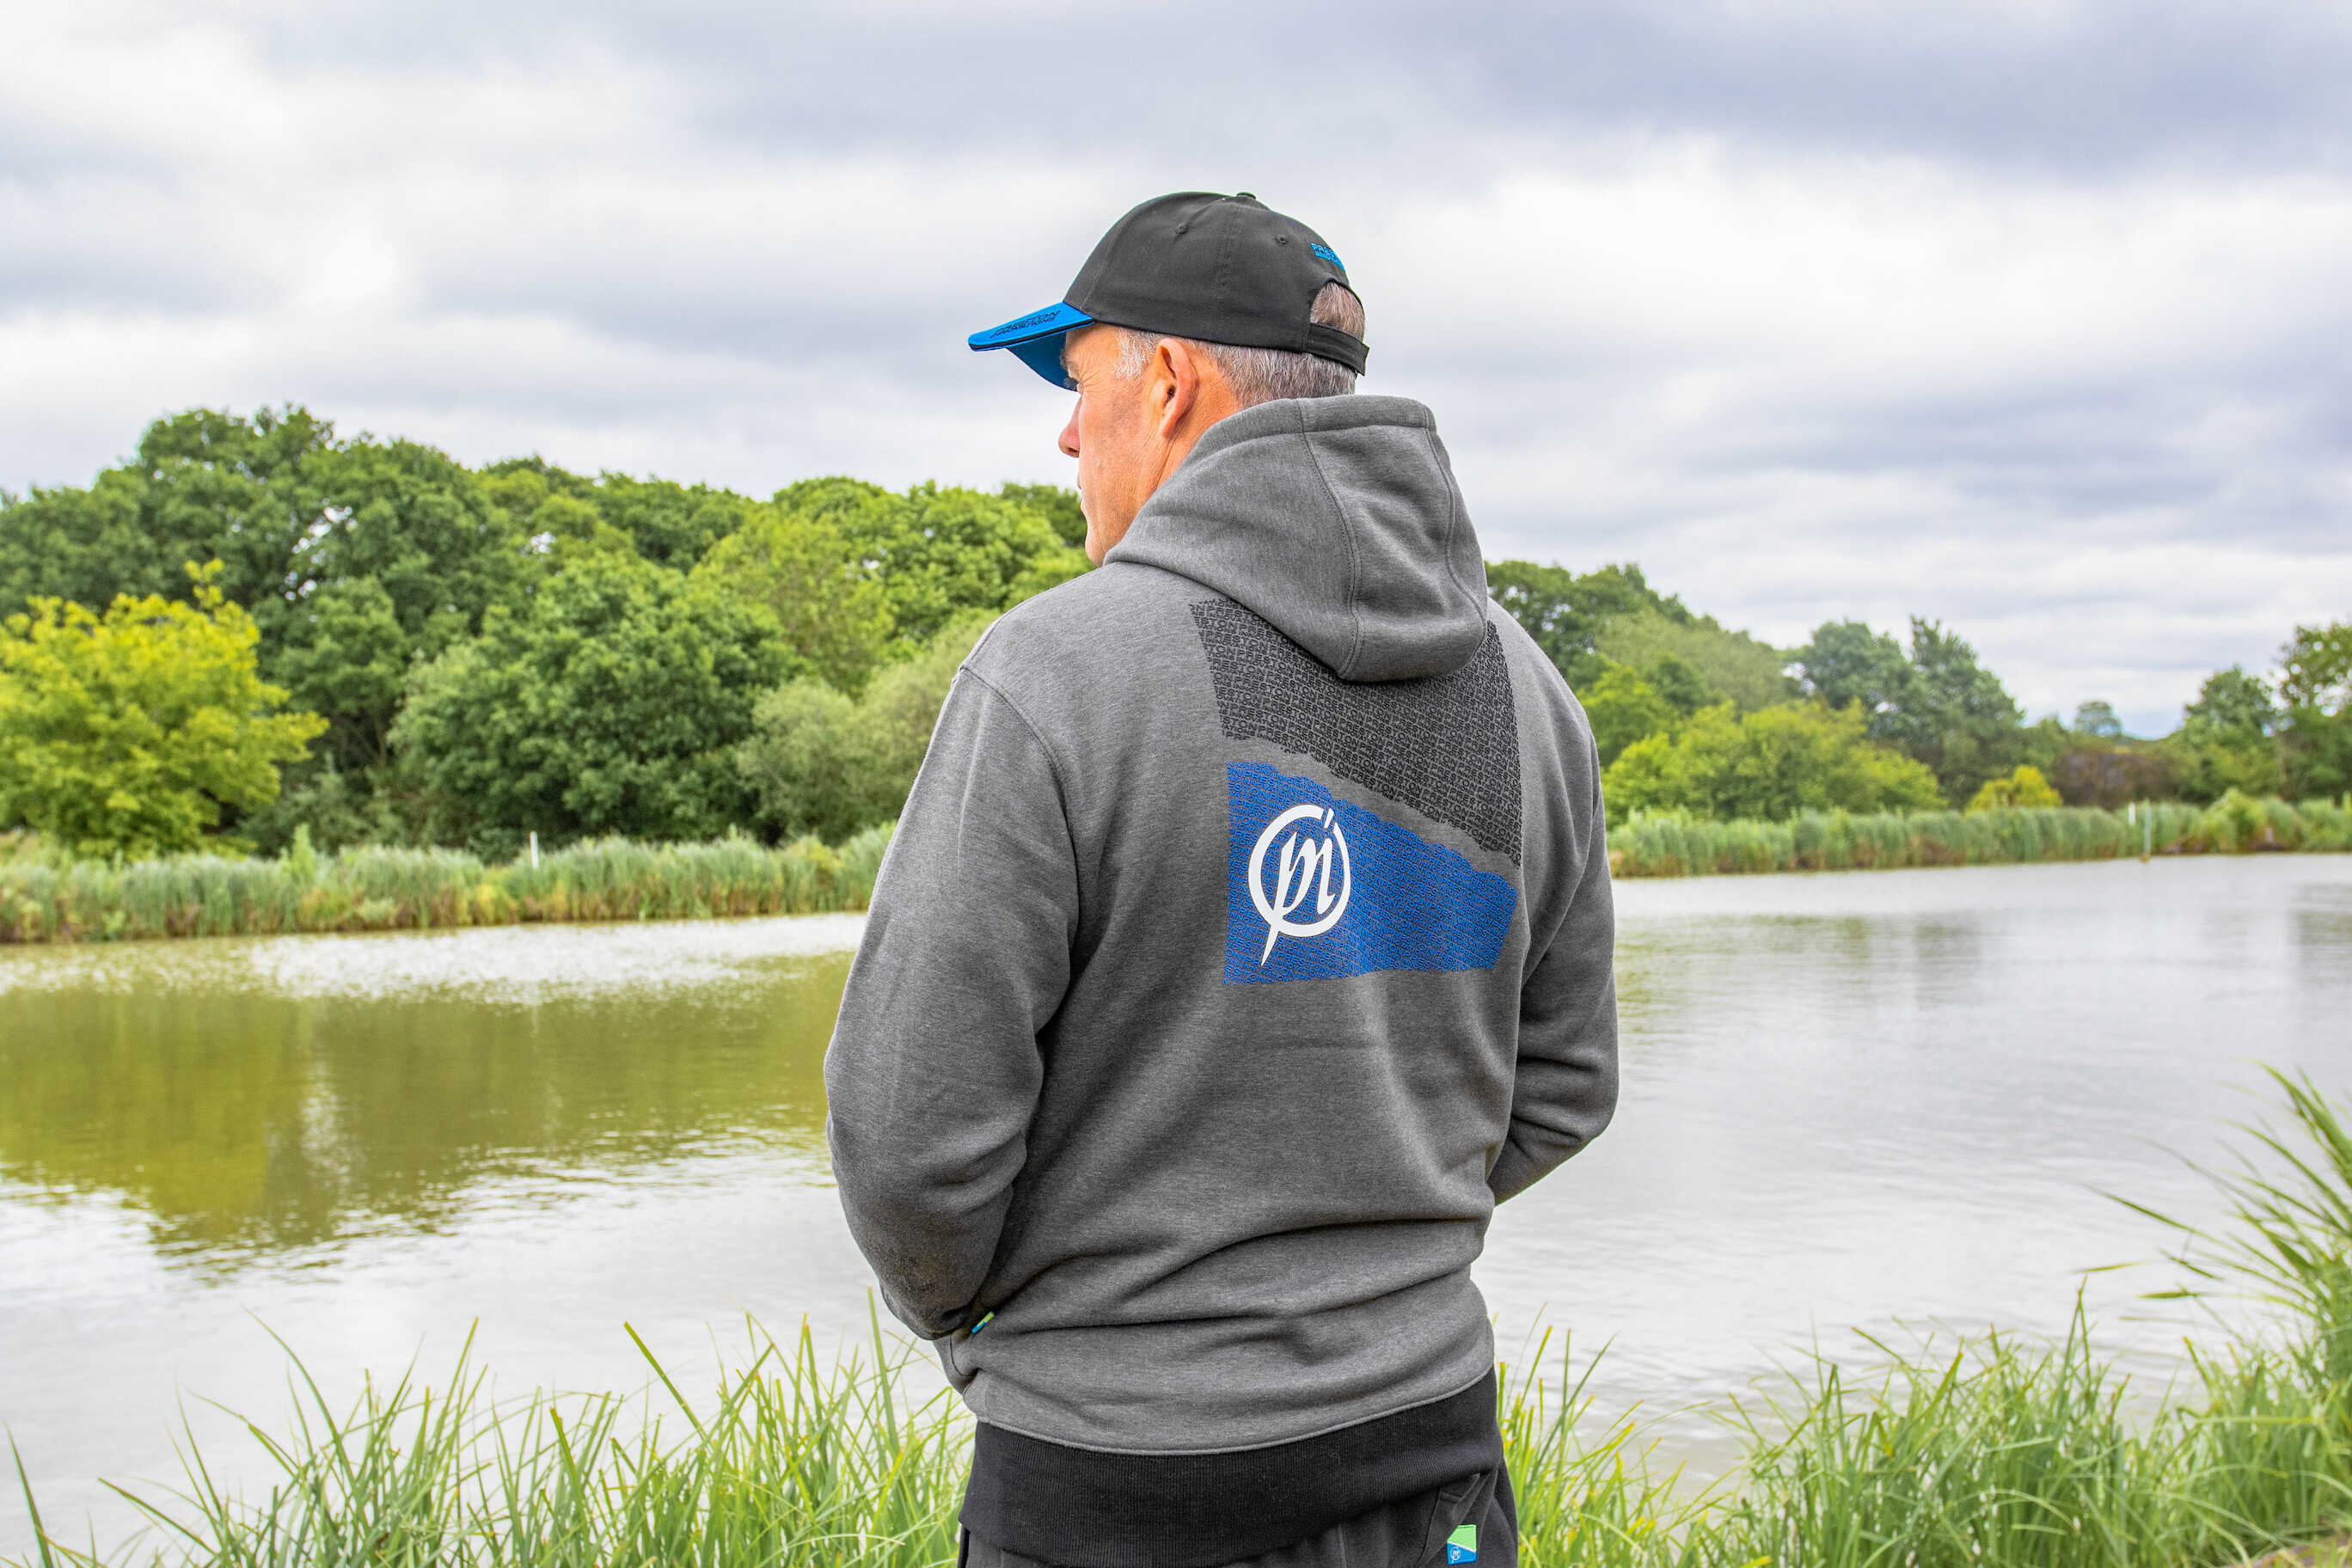 Grey Zip Hoodie | UK Match Fishing Tackle For True Anglers 